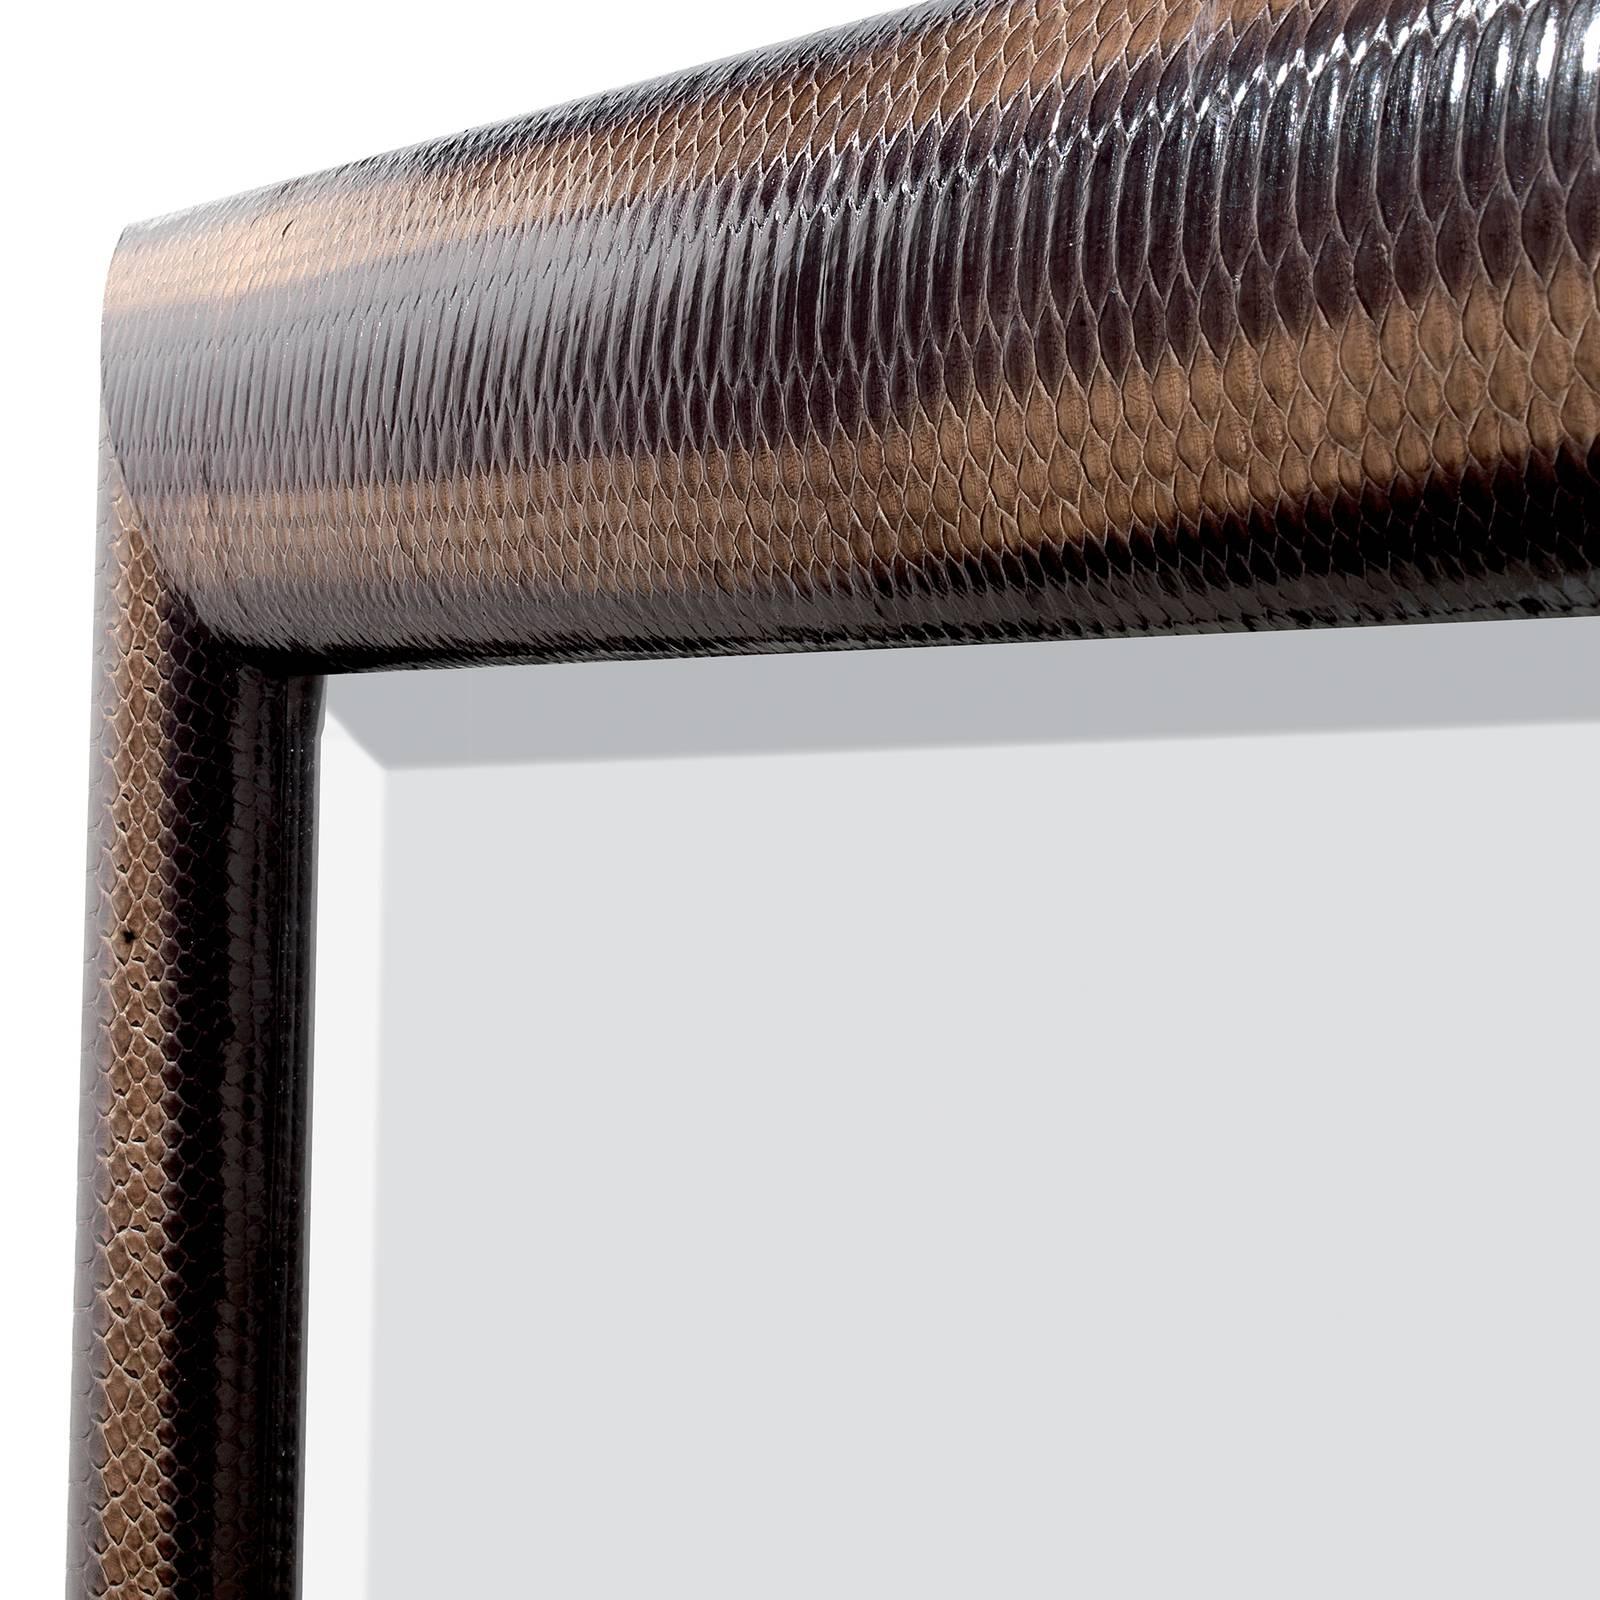 Part of the Python collection, featuring striking mirrors whose elegant frames are upholstered in genuine python leather, this piece features a wooden structure and back. The mirror, with minimalist moldings at the edges, is enclosed in a stunning